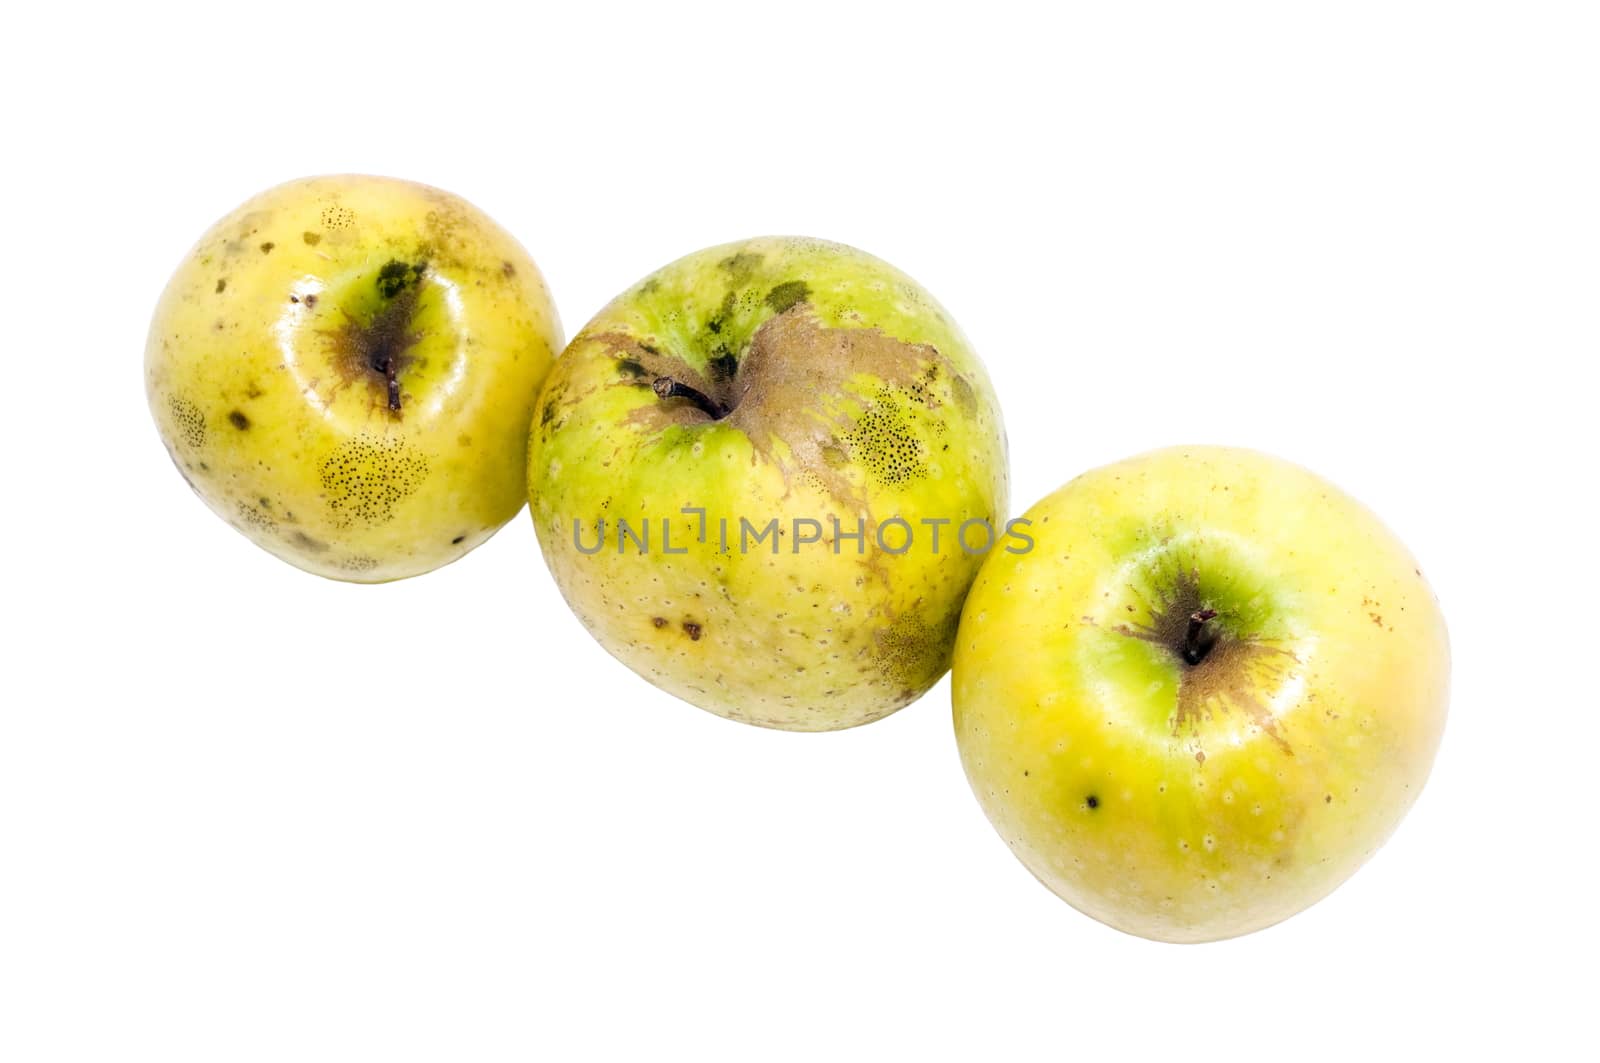 three yellow organic apples on a white background